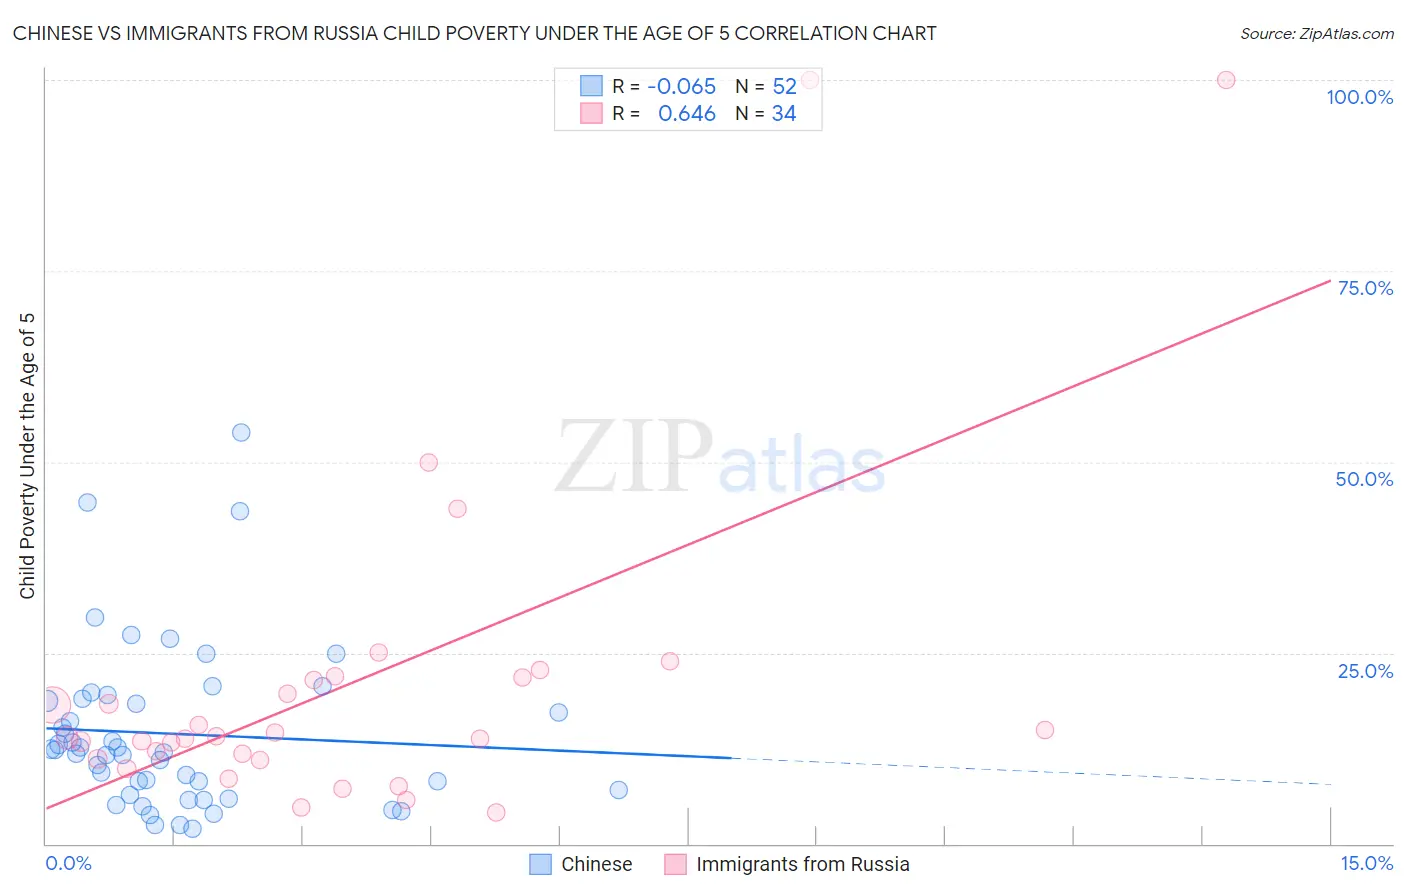 Chinese vs Immigrants from Russia Child Poverty Under the Age of 5